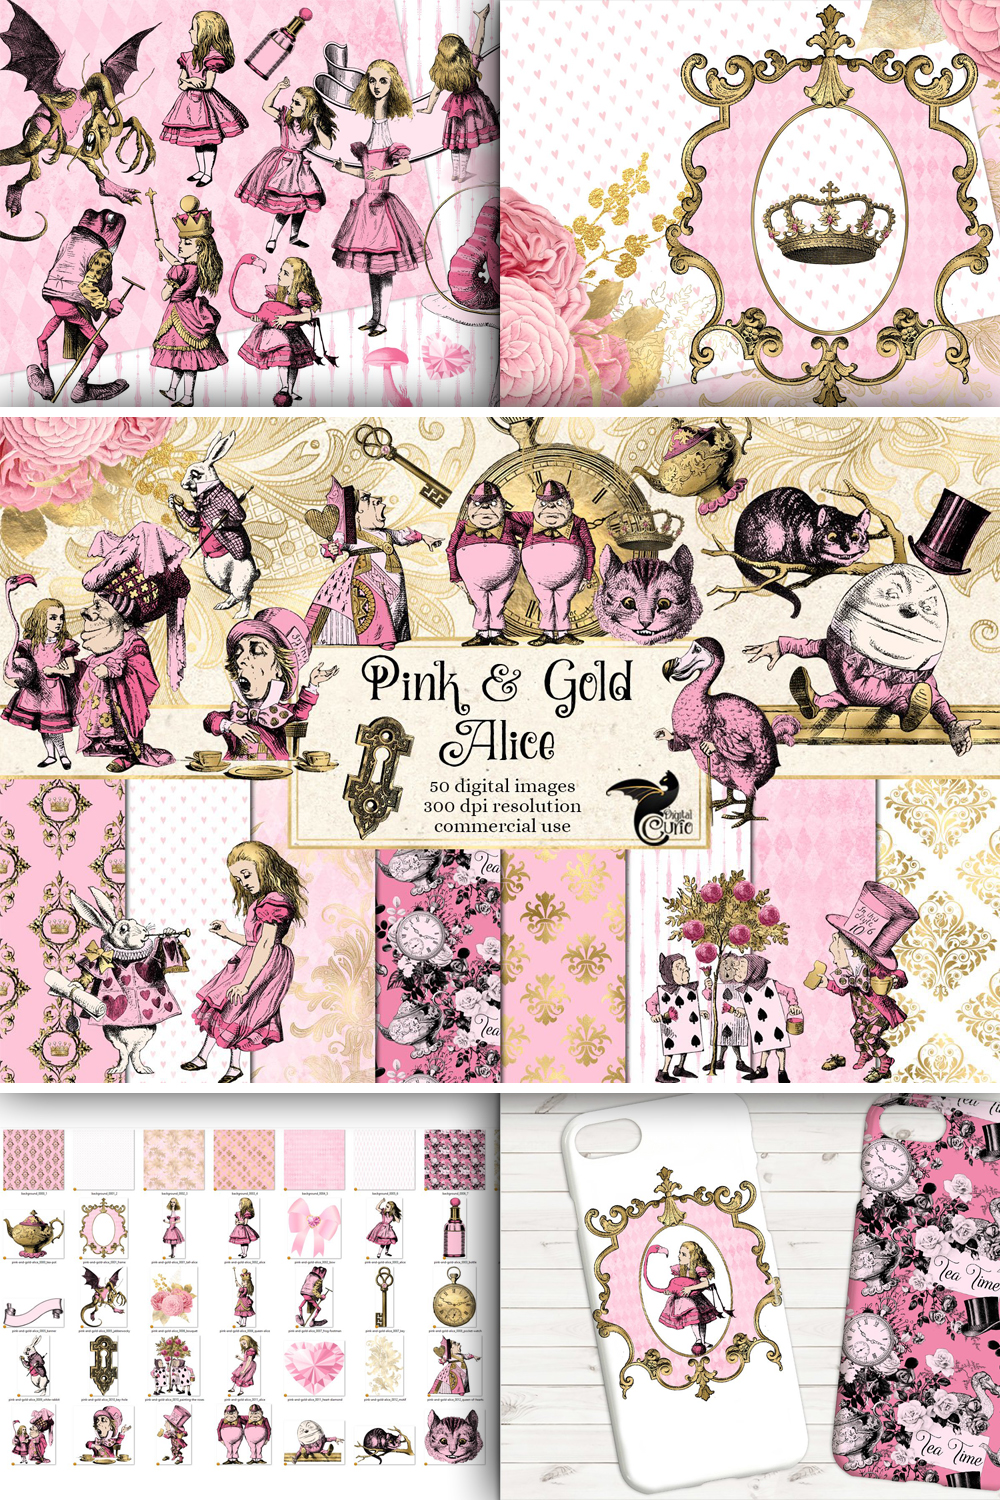 Pink and gold alice in wonderland graphics of pinterest.